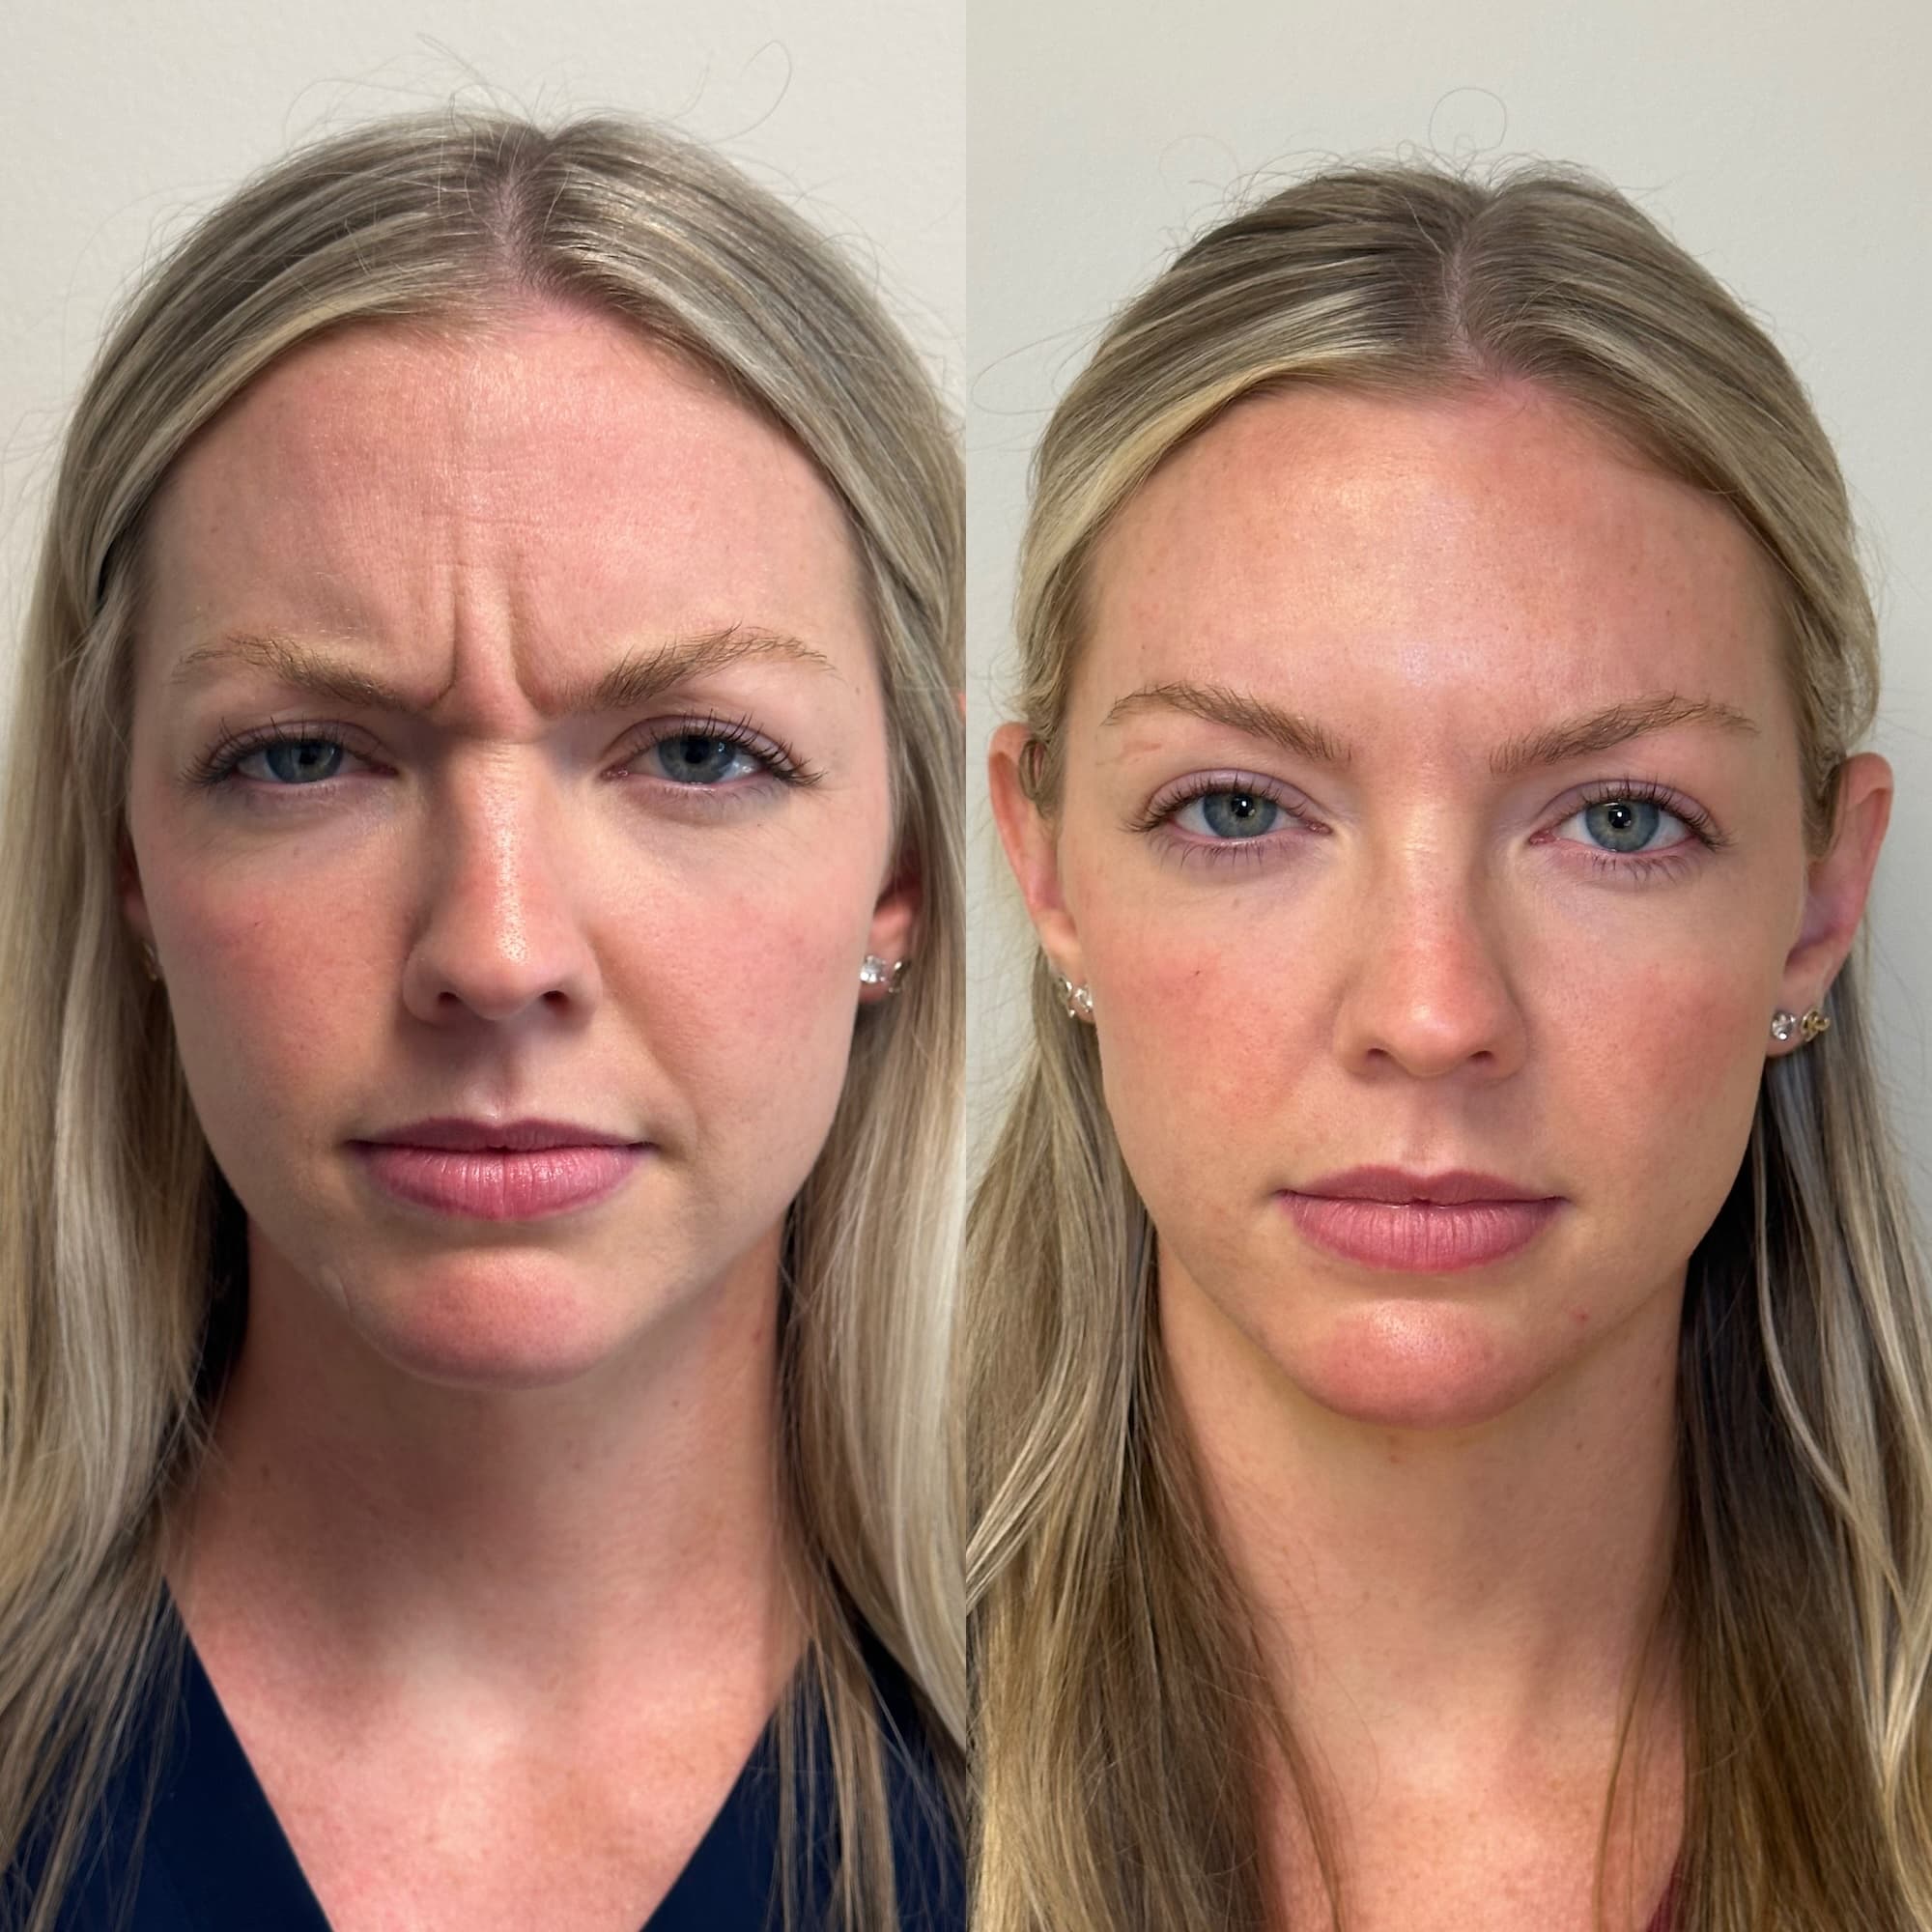 Woman's face front view before and after showing results of Dysport - fewer frown lines